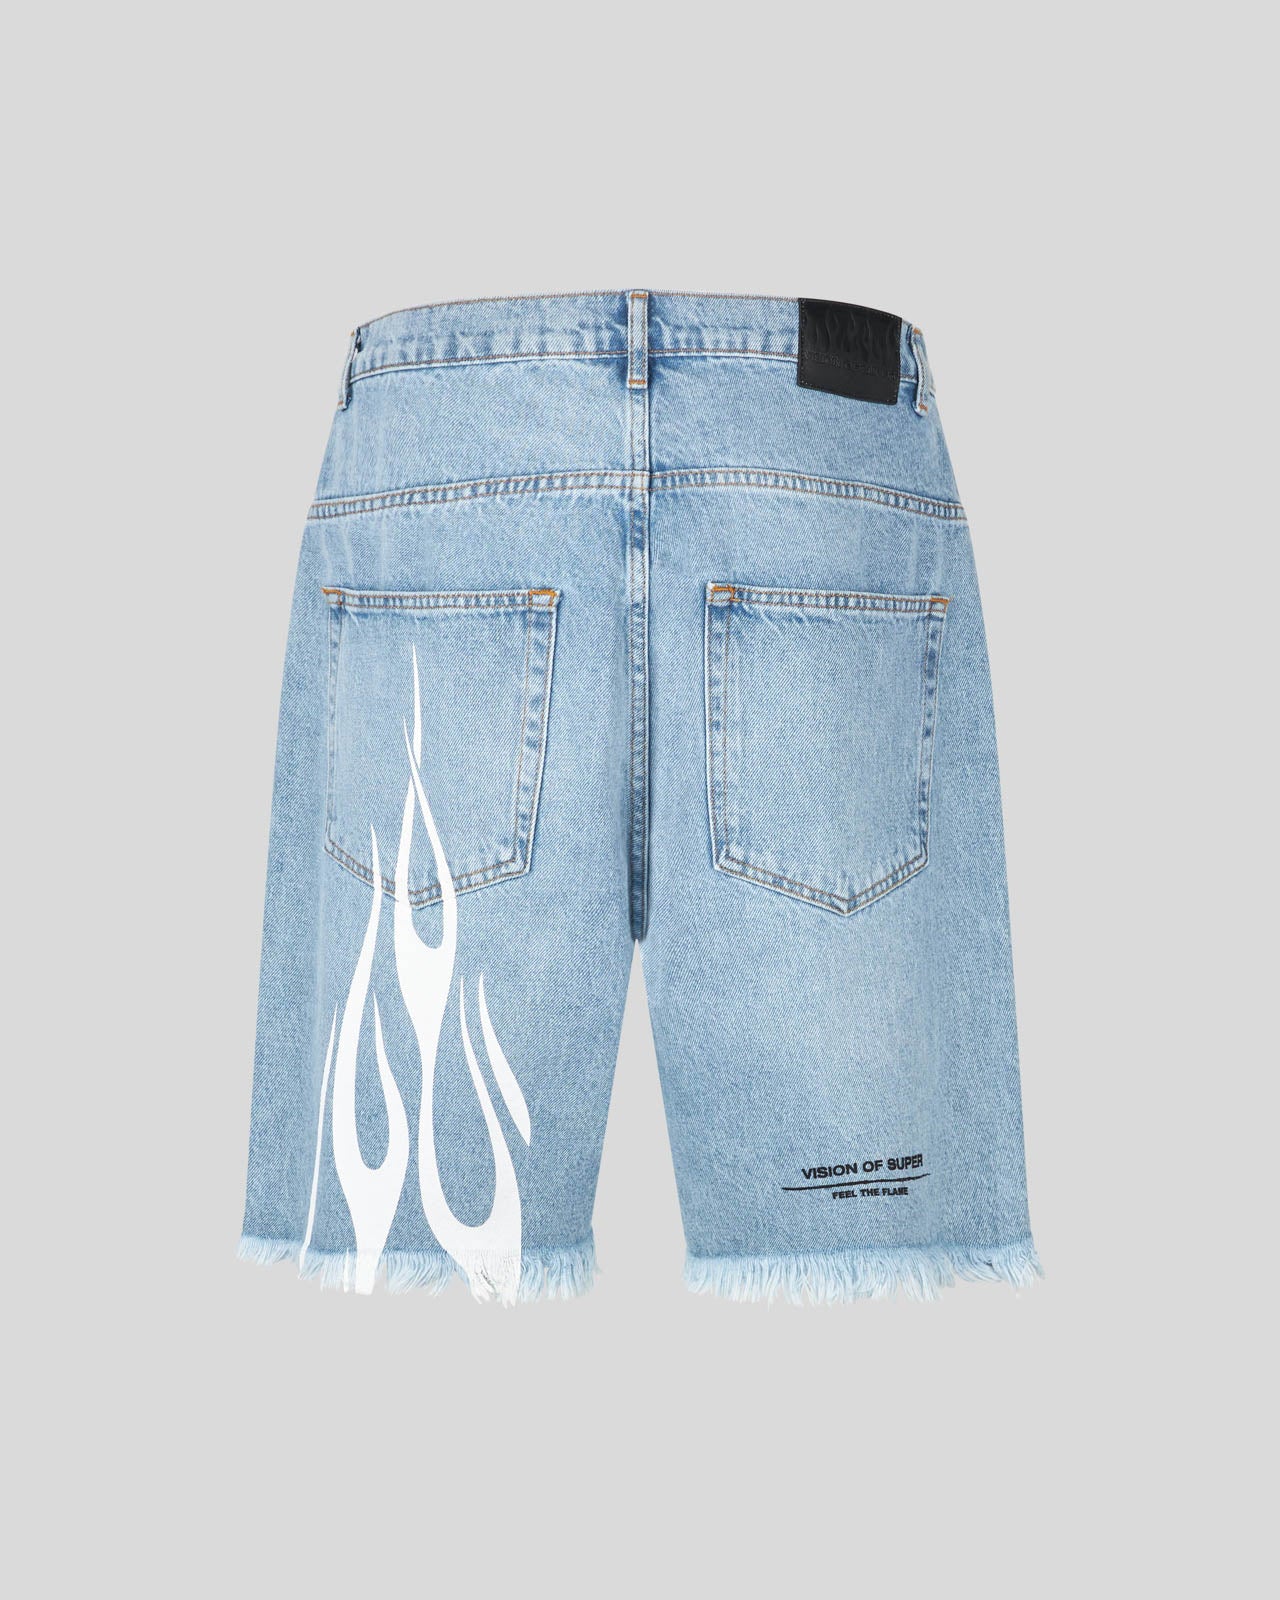 BLUE DENIM SHORTS WITH PRINTED FLAMES AND LOGO